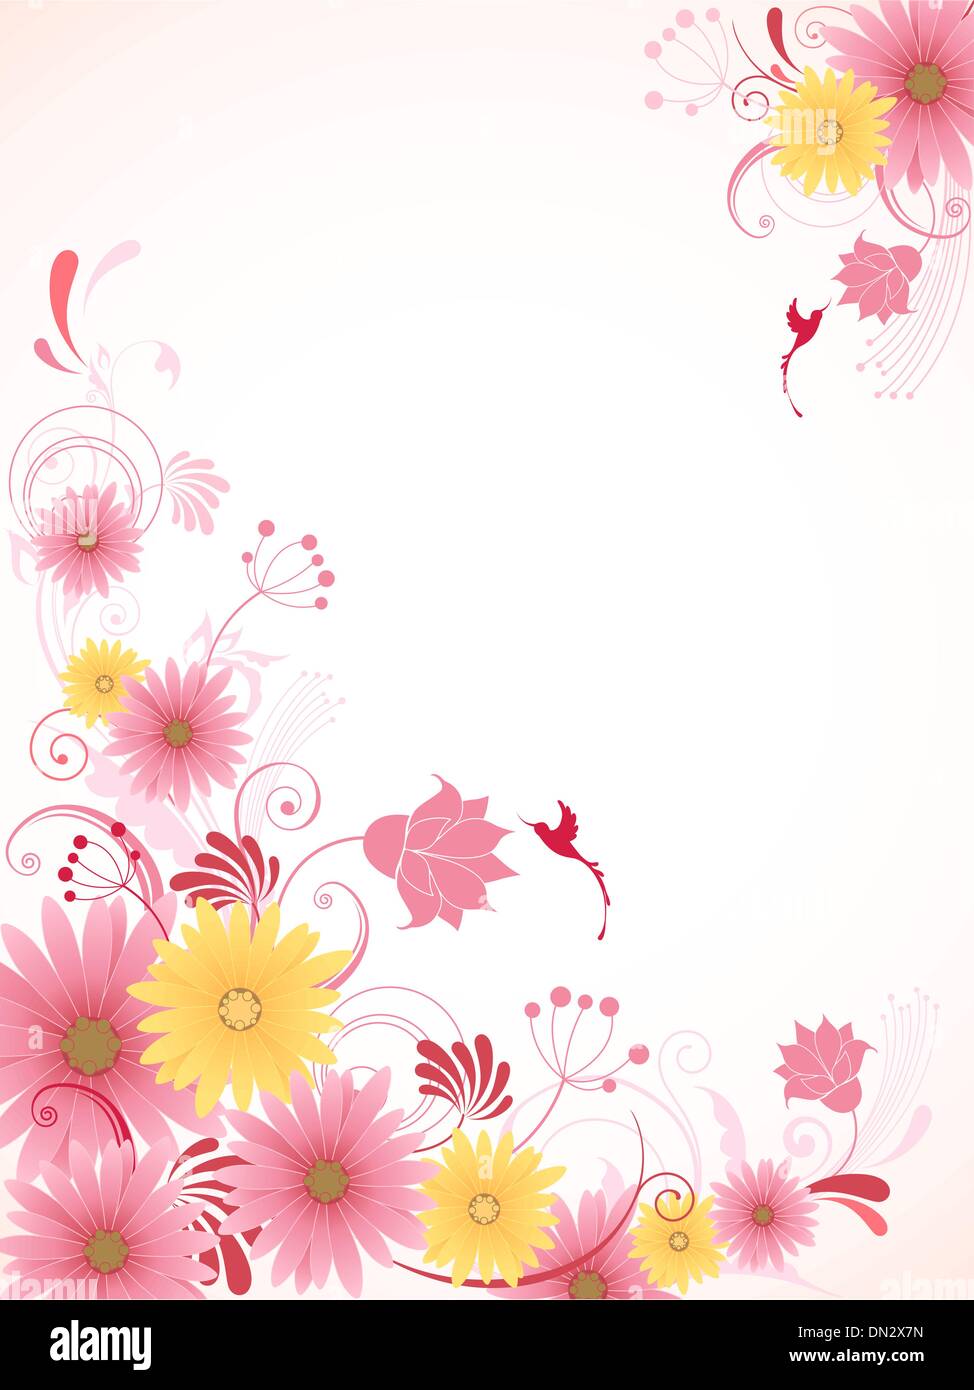 floral background with pink flowers Stock Vector